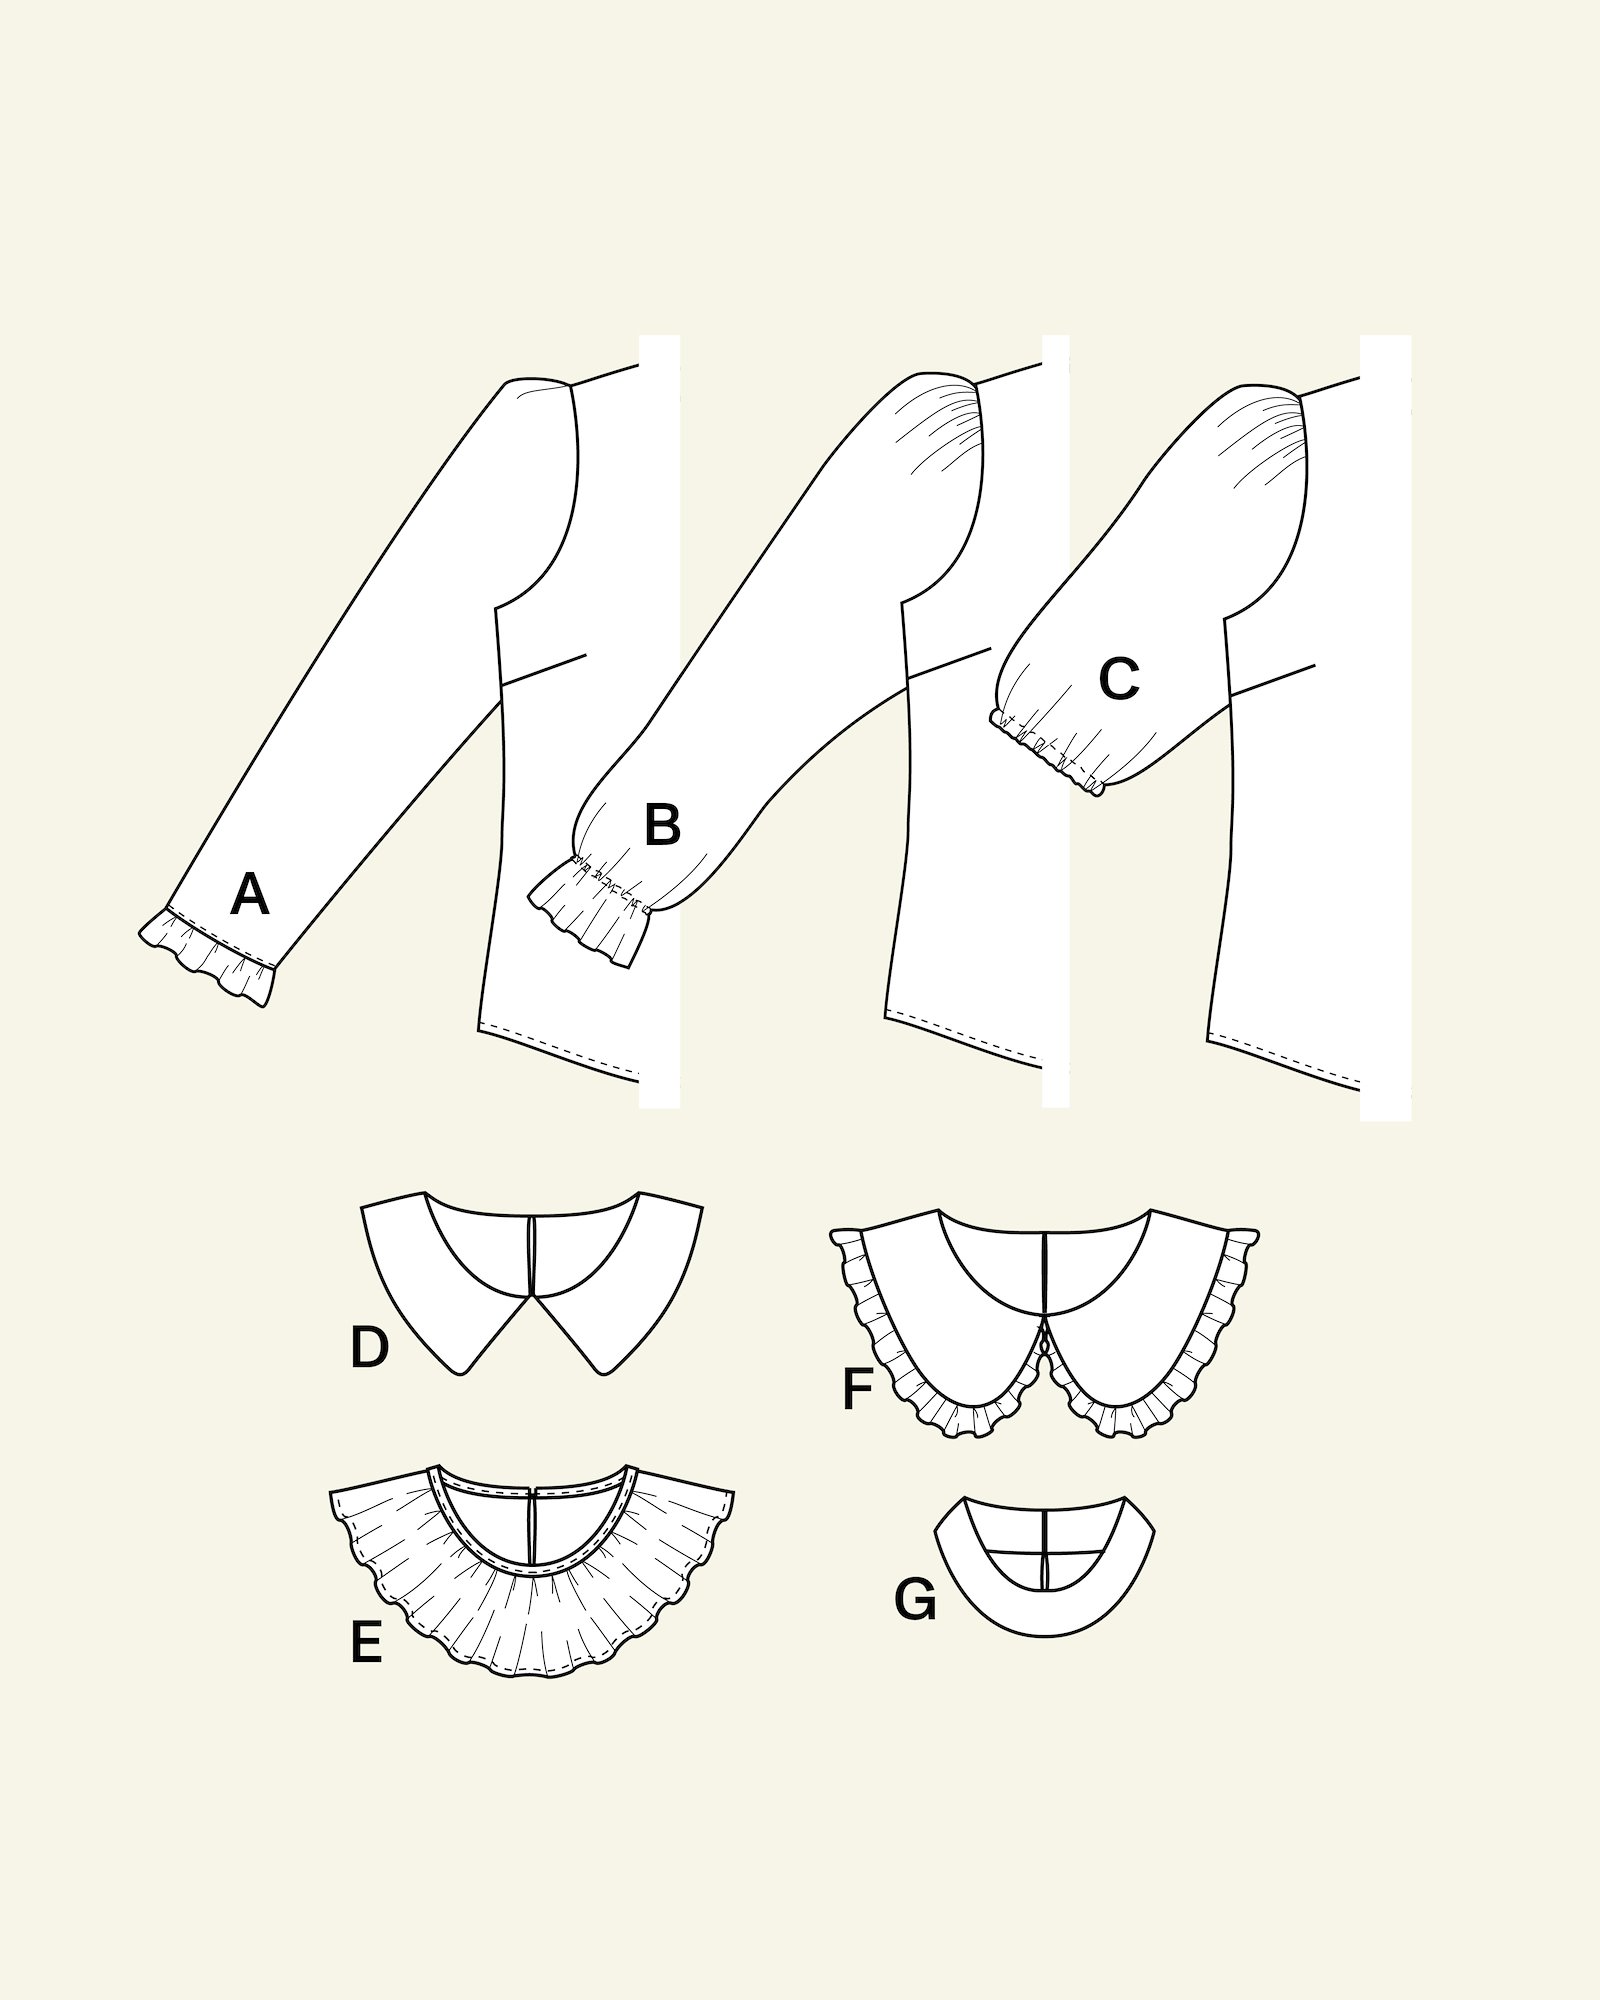 Design your own blouse, 36/8 p22075_pack